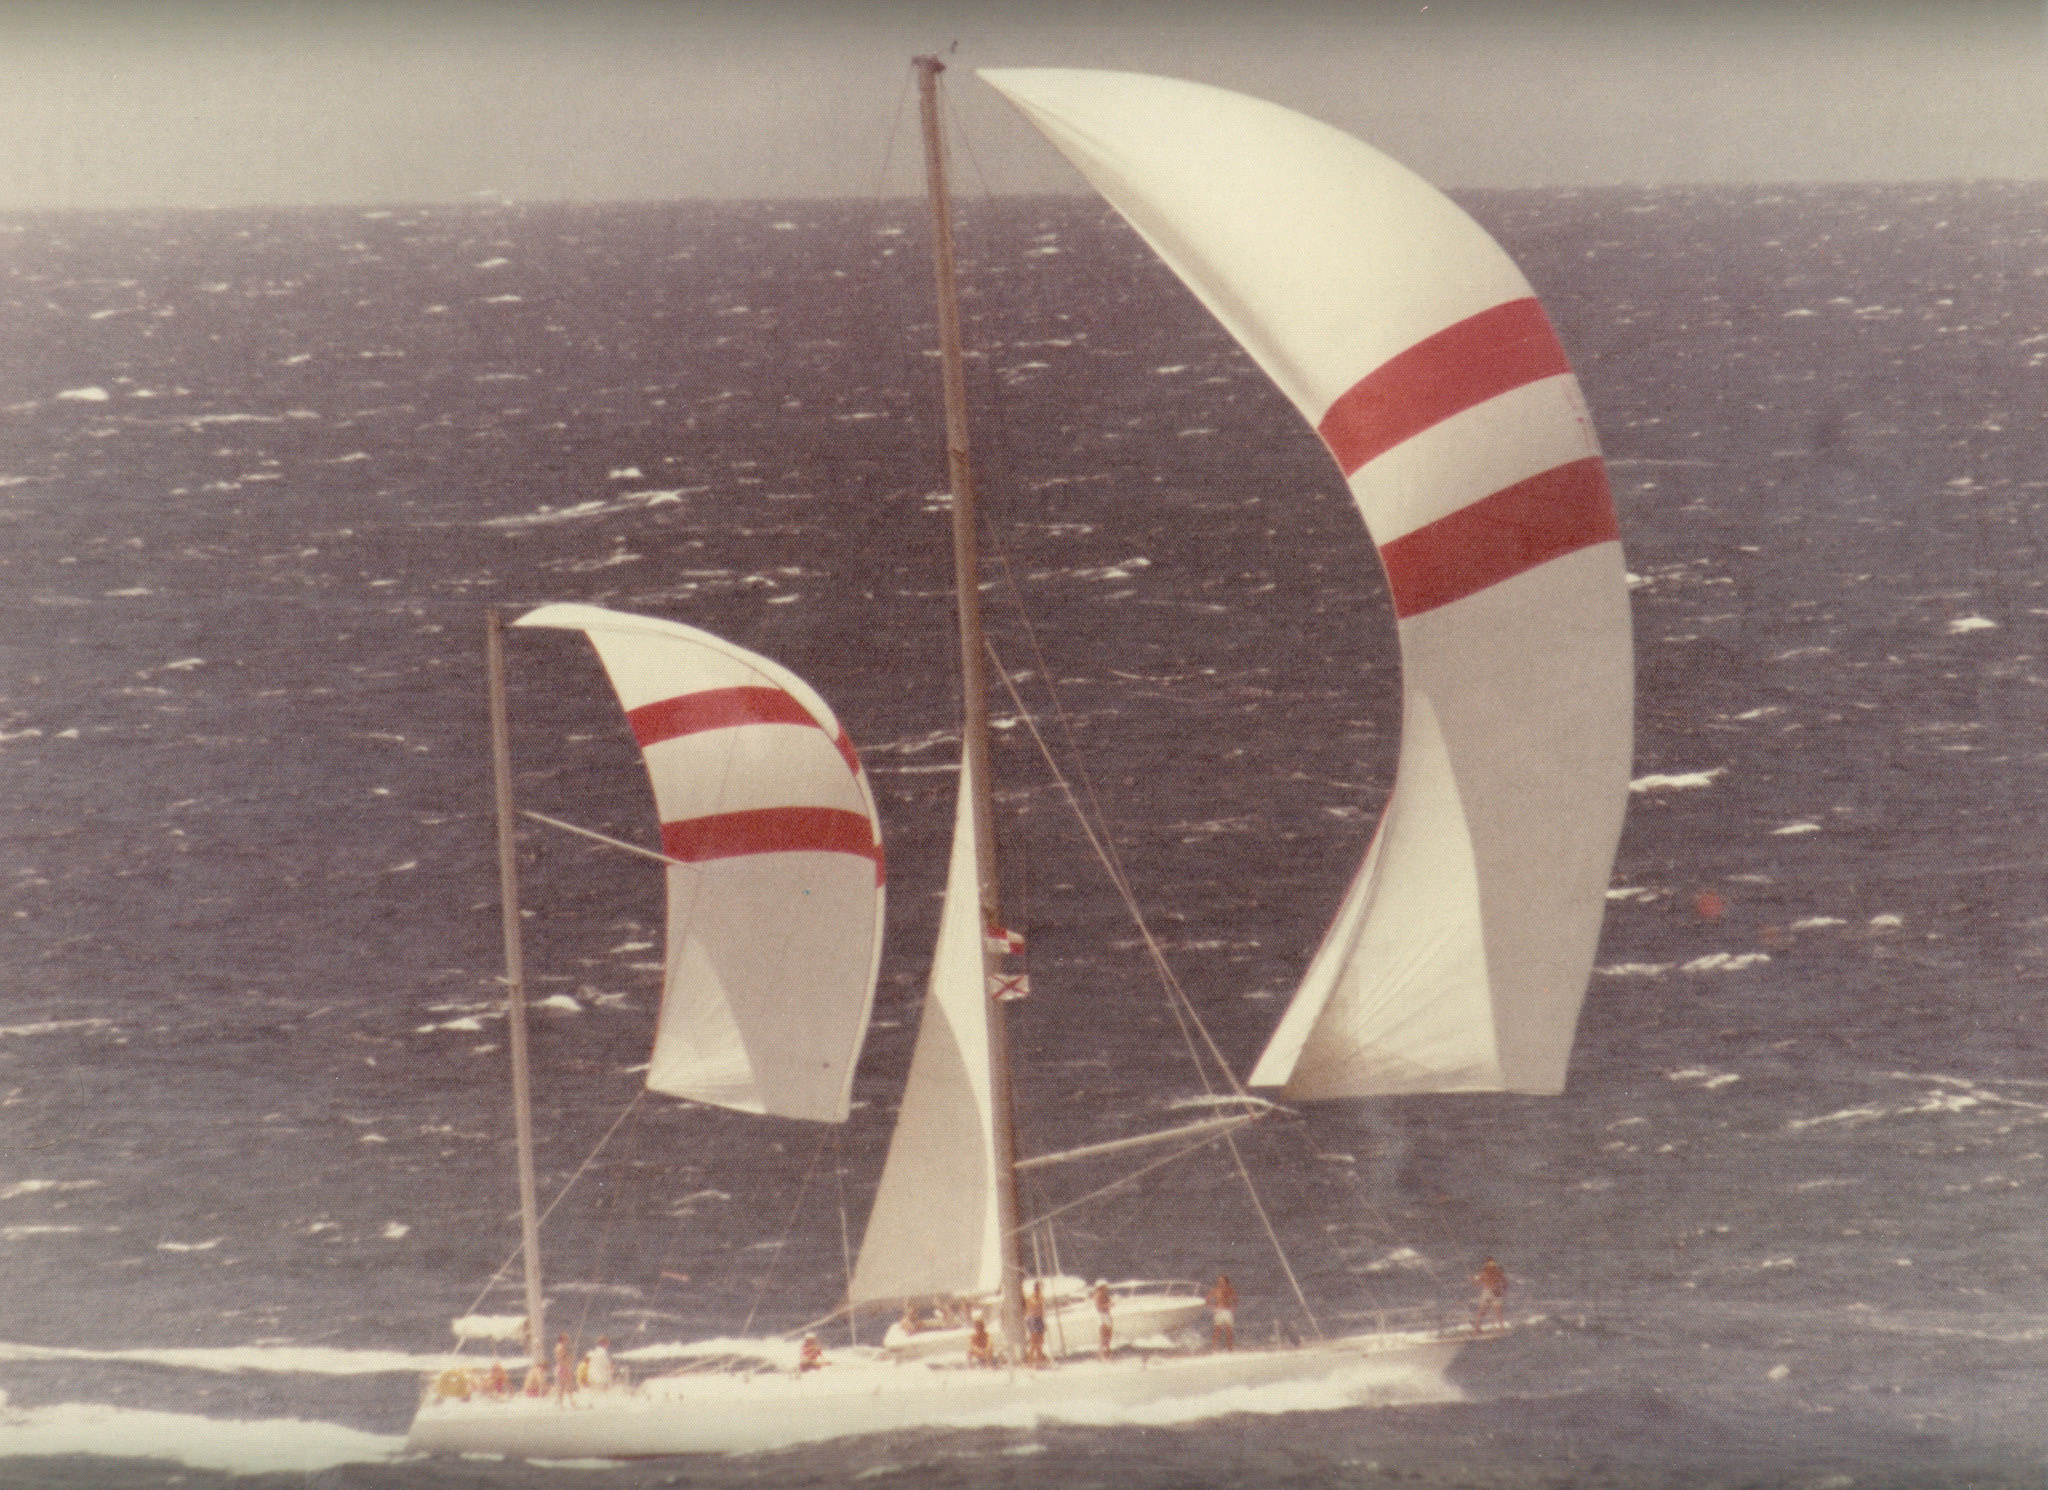 The 1977 race is forever in Transpac history. The speed record set by the crew of a Merlin yacht (8 days, 11 hours, 1 minute and 45 seconds) cannot be beaten for the next 20 years, until 1997. Only then will the Pyewacket family boat crew be able to improve this time for almost a day, with a score of 7 days, 15 hours, 24 minutes and 40 seconds.